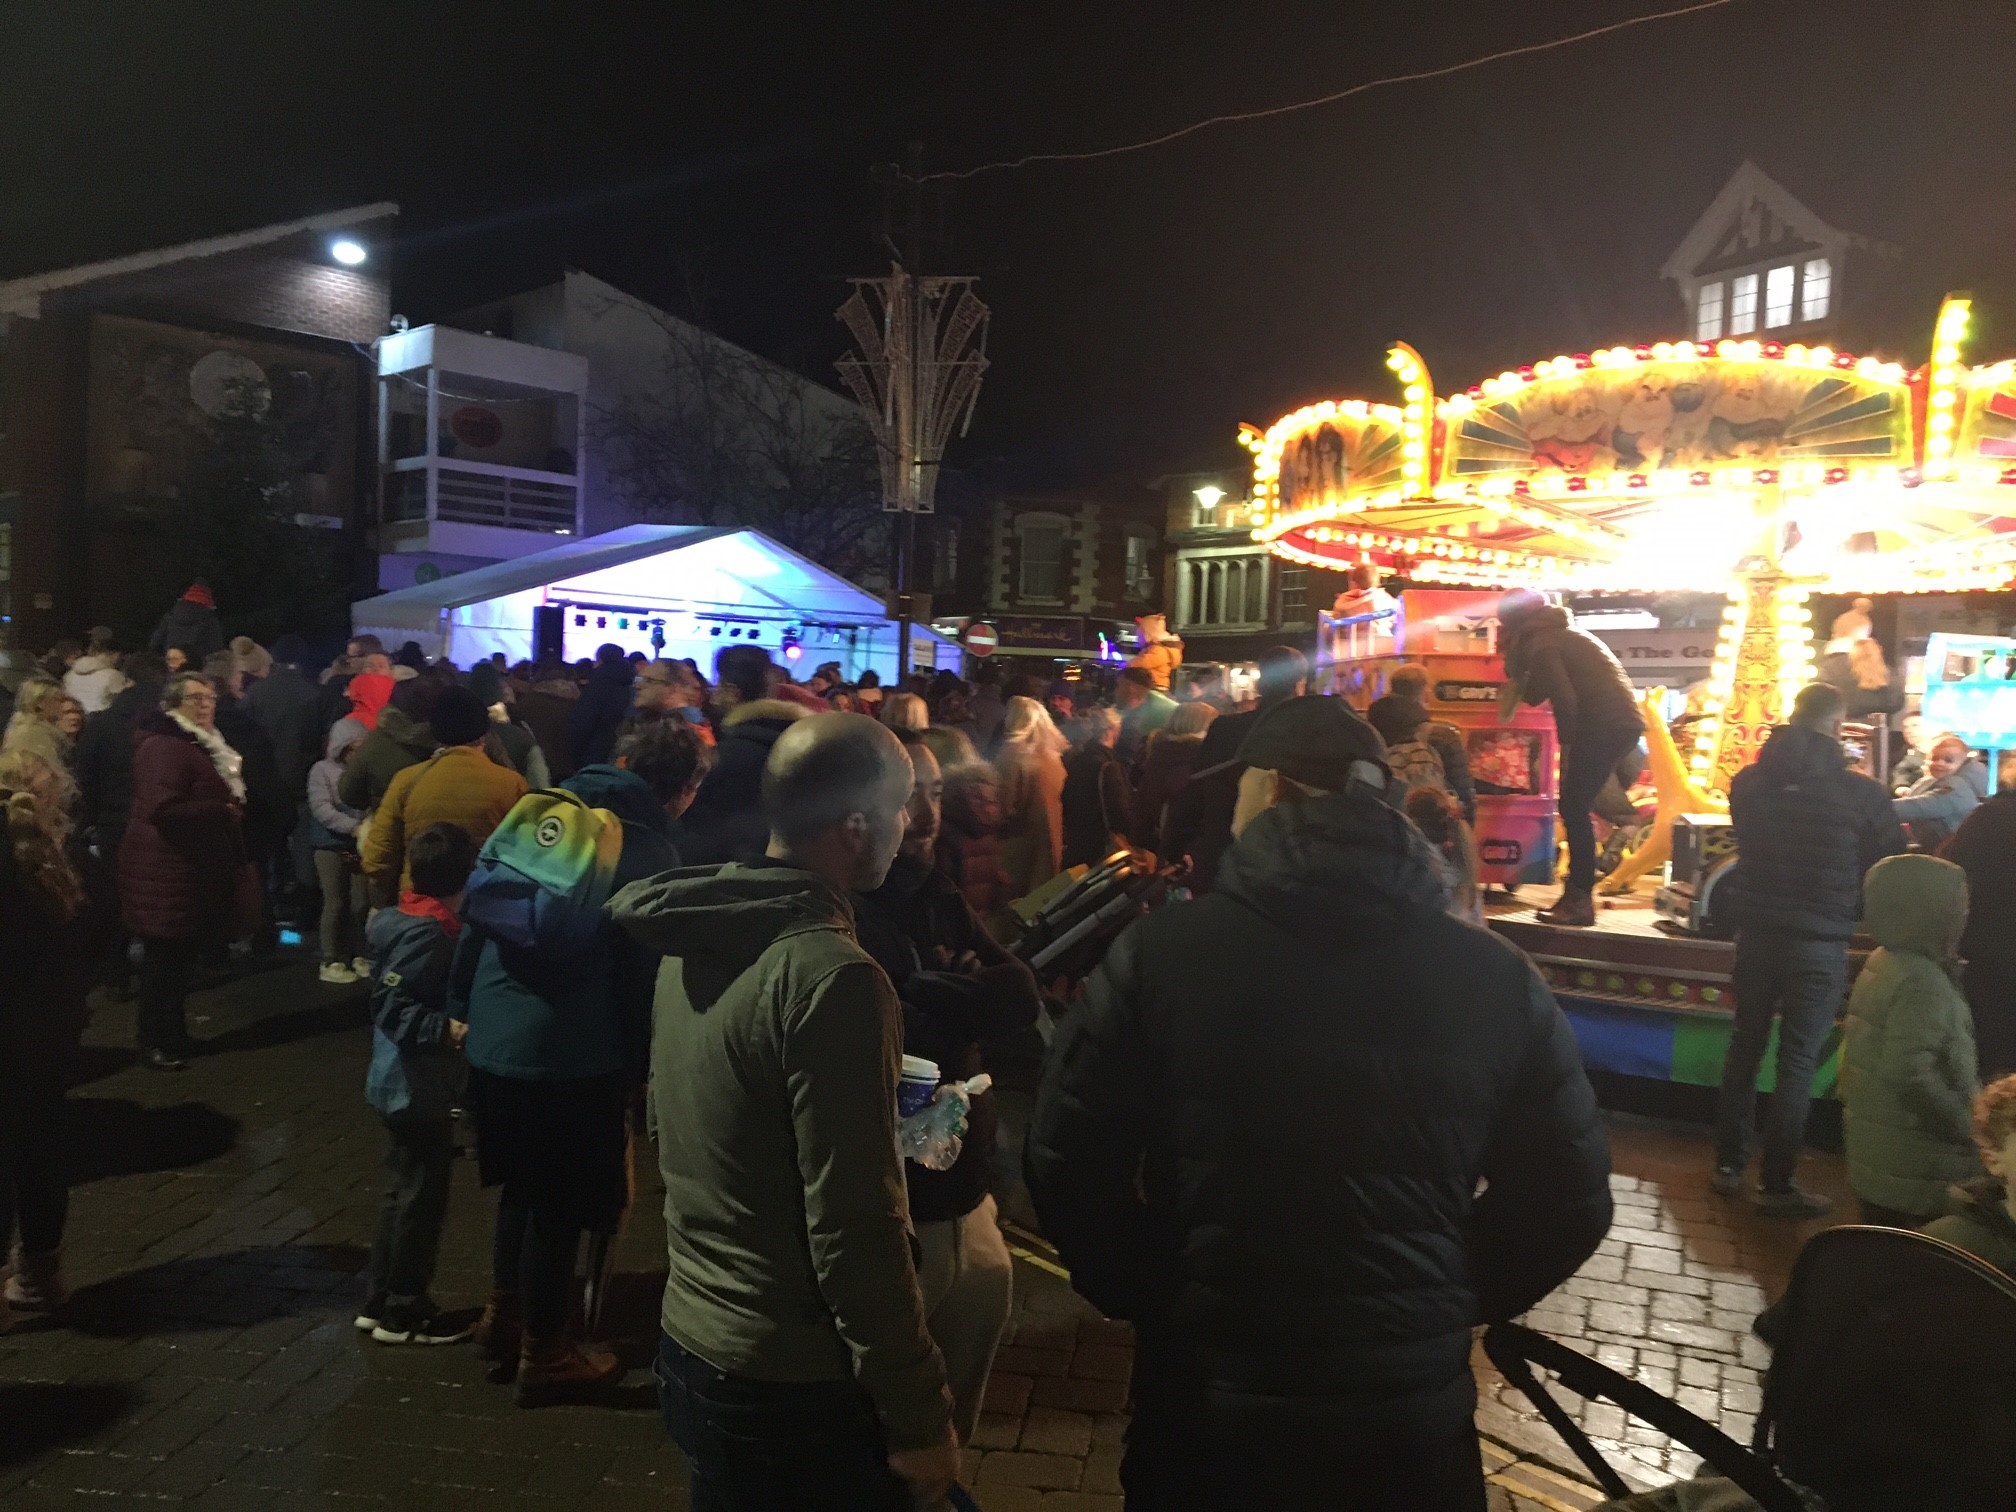 Leominster Christmas lights switch-on took place on Saturday (November 26)